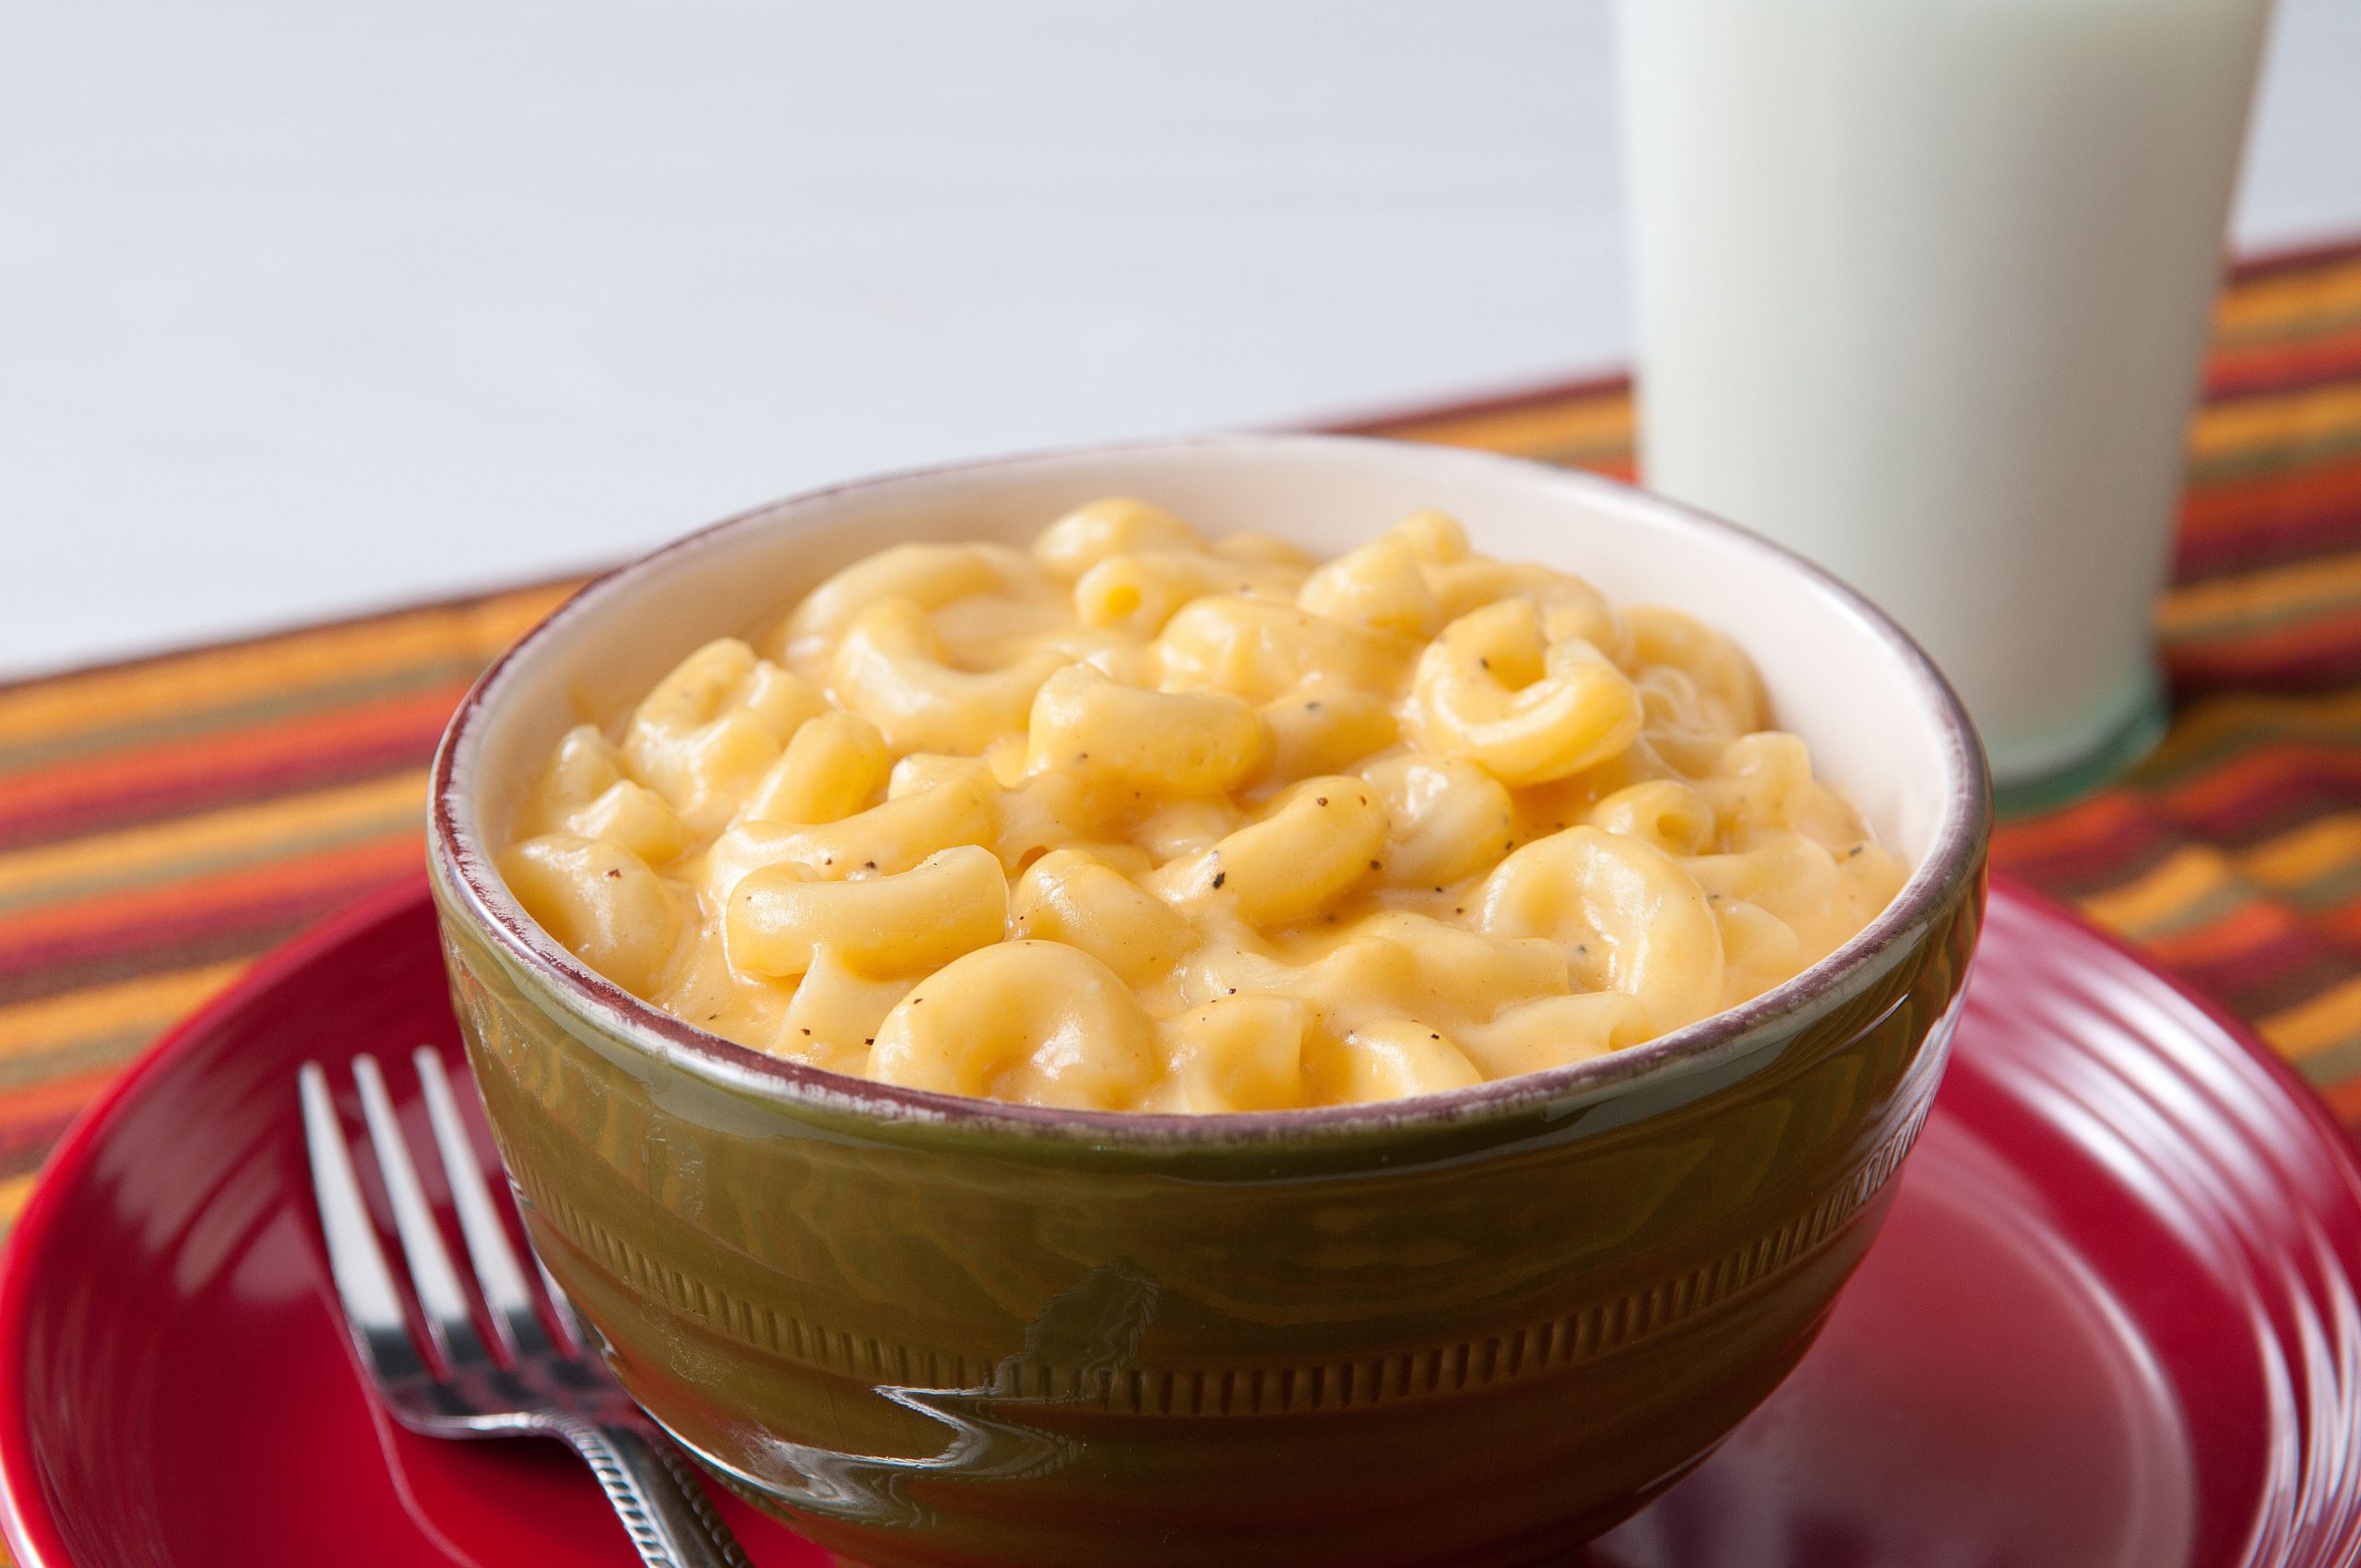 Macaroni noodles in a creamy cheese sauce with a sprinkle of black pepper